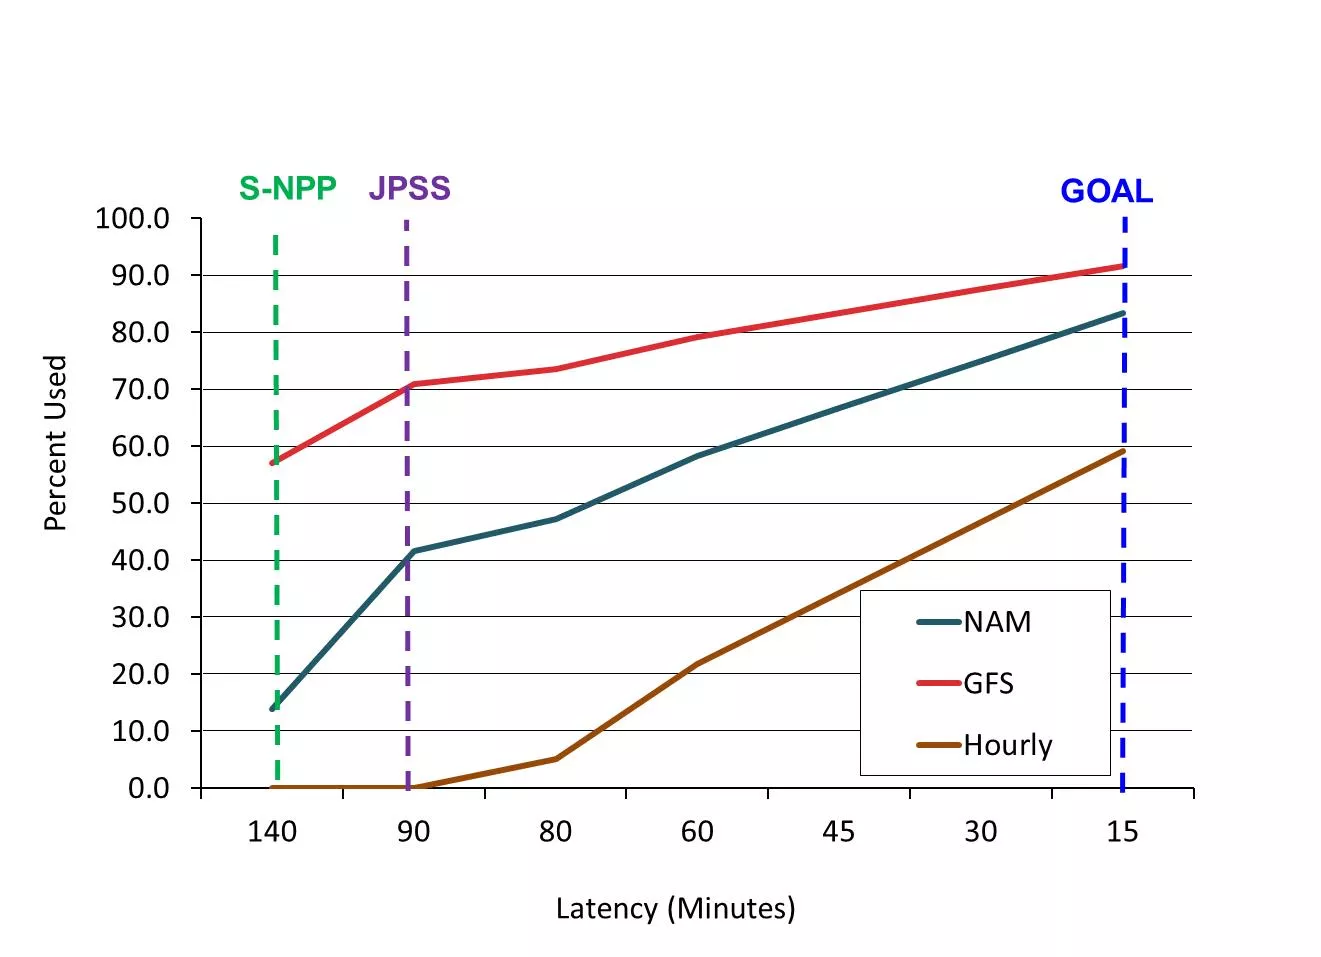 The percentage of data used by models versus latency. The vertical dash lines are the specification latency for Suomi NPP and JPSS. The latency from direct readout stations is within 20 minutes.